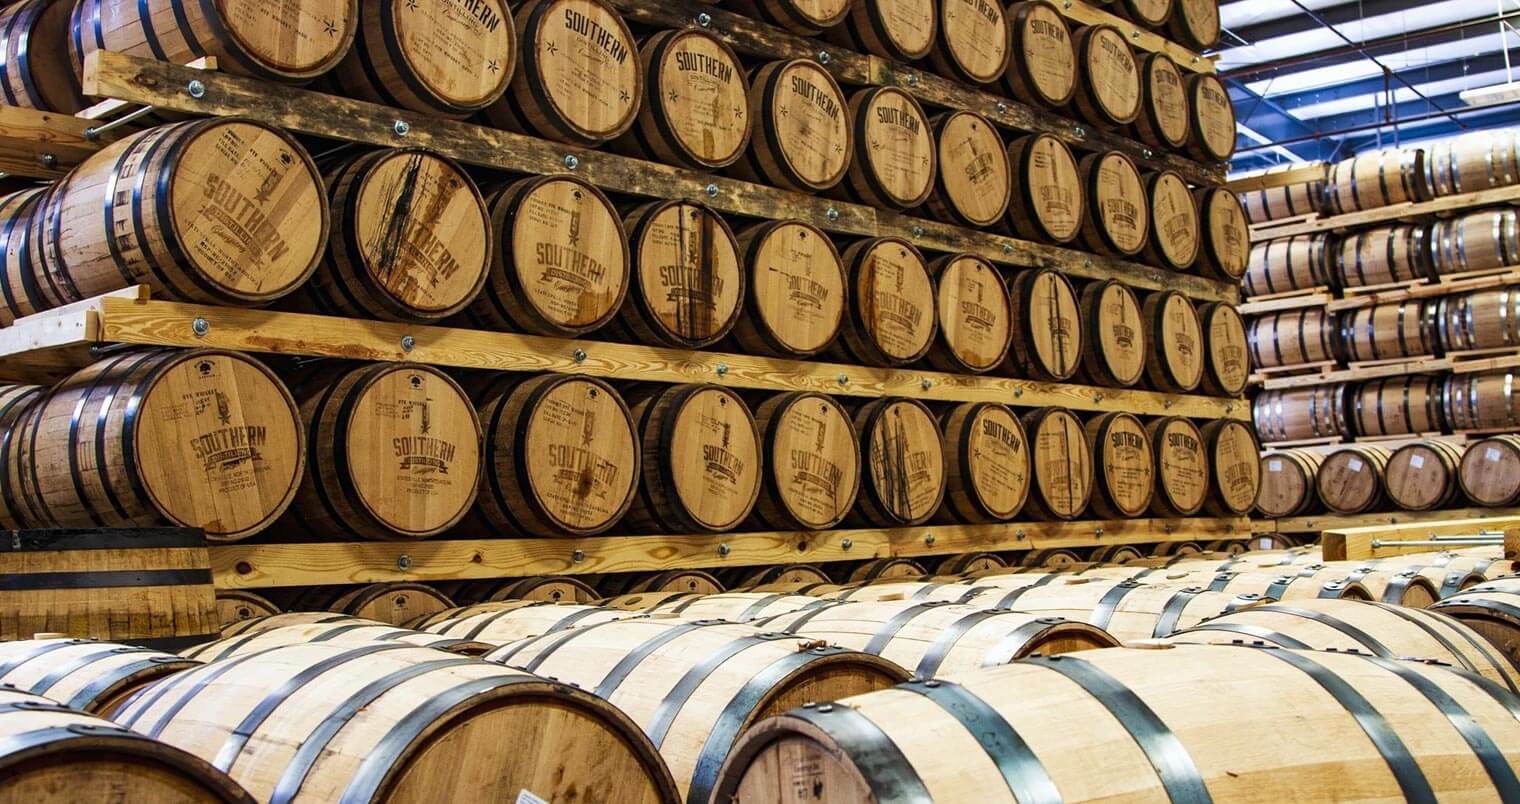 Southern Distilling Company, barrel room, featured image